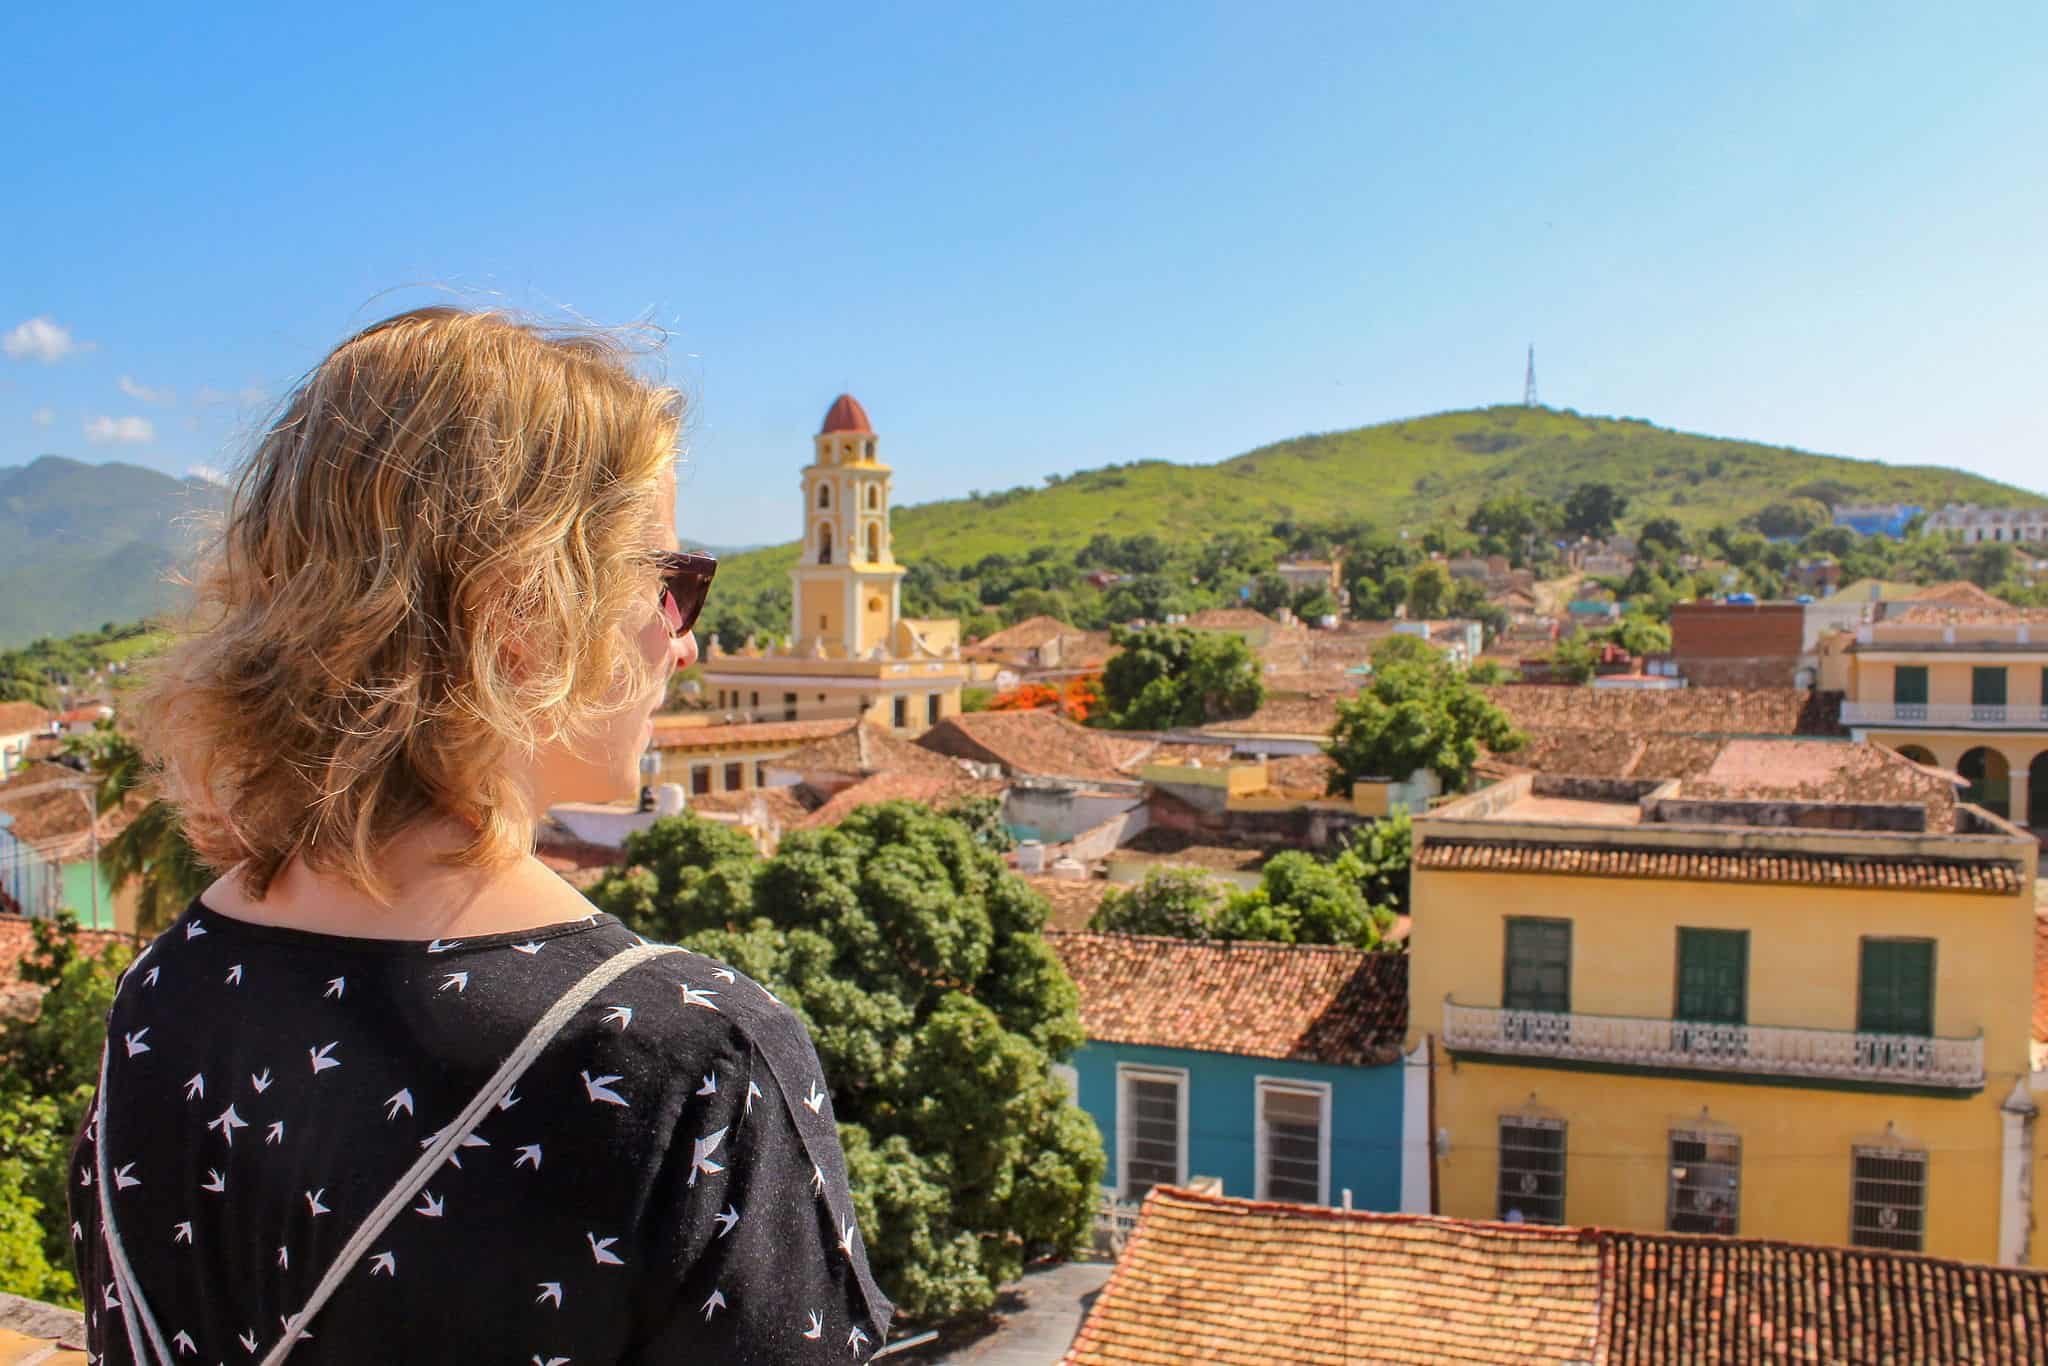 Woman looking out over Trinidad, Cuba